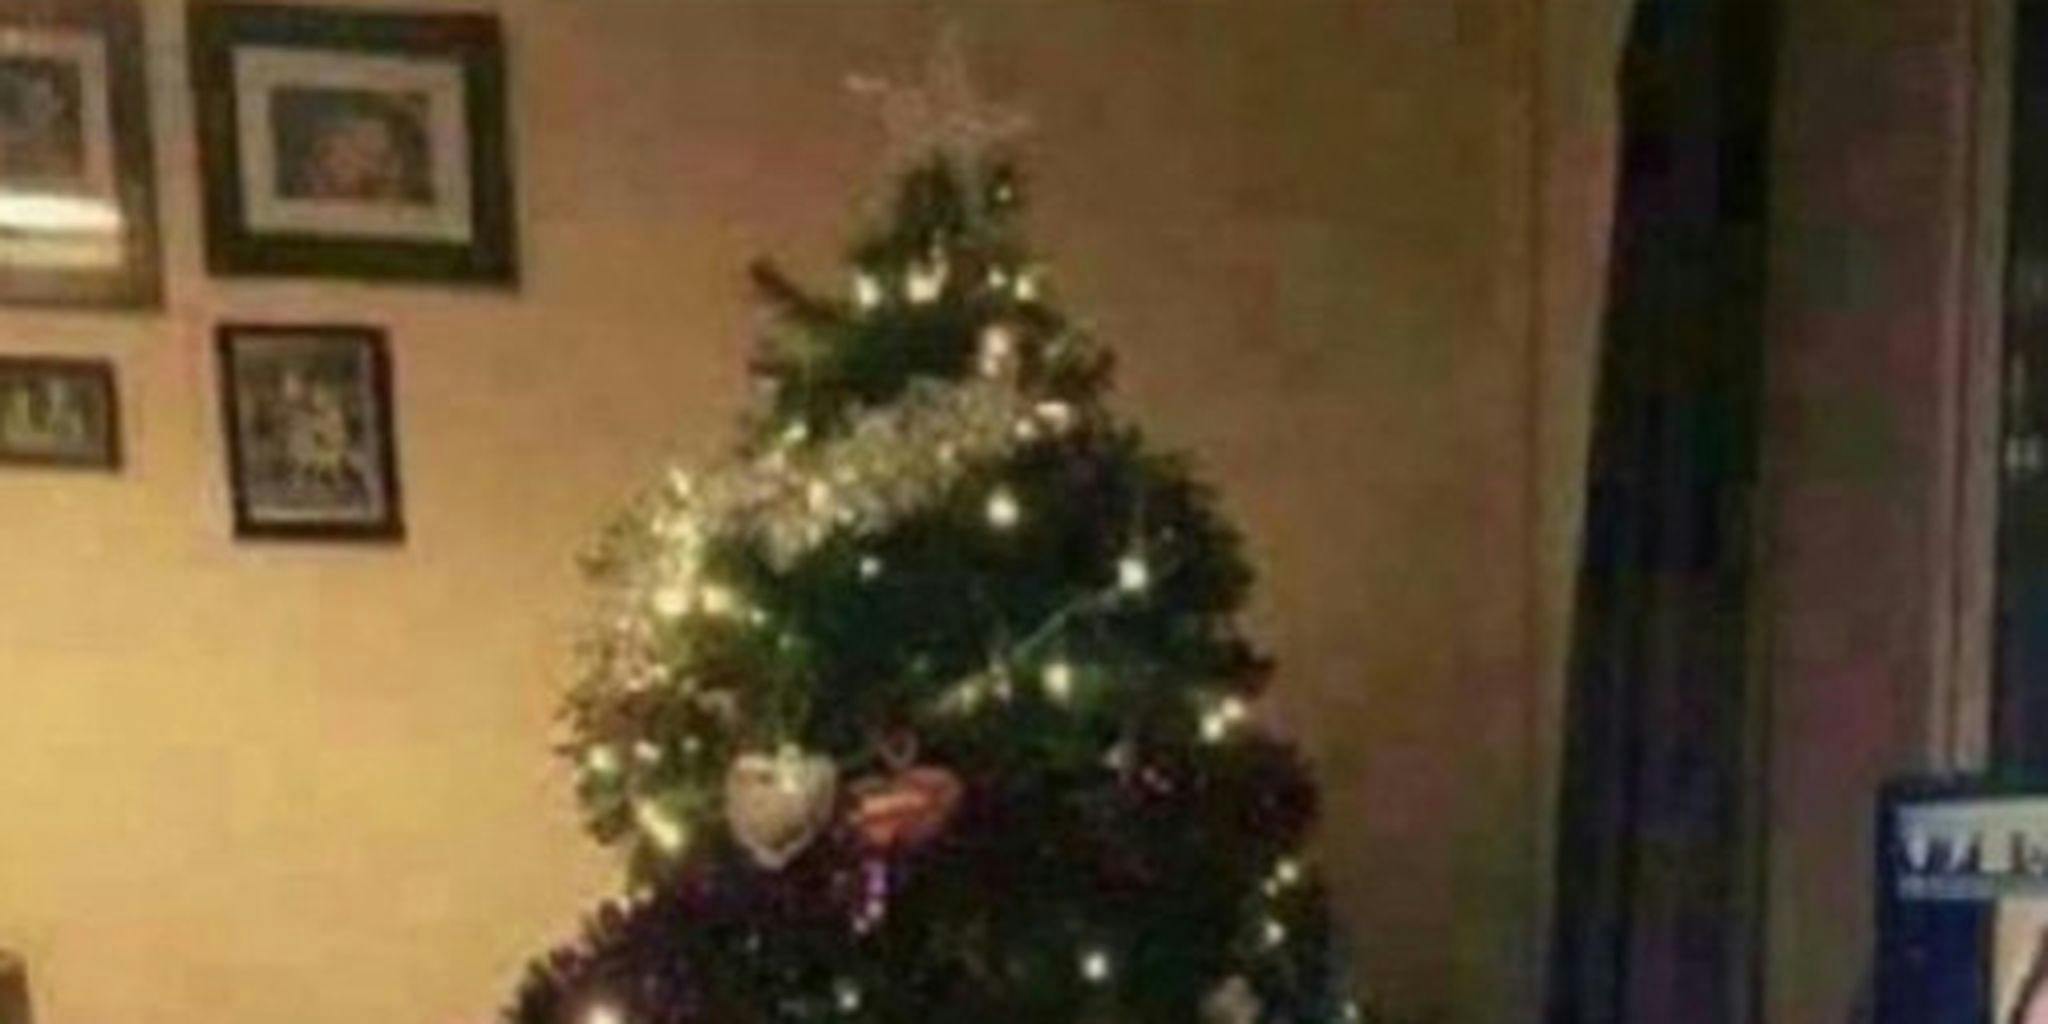 The Christmas Tree Porn - Former WWE Star Posts Christmas Tree Photo, Fails to Crop Out the Porn He  Was Watching